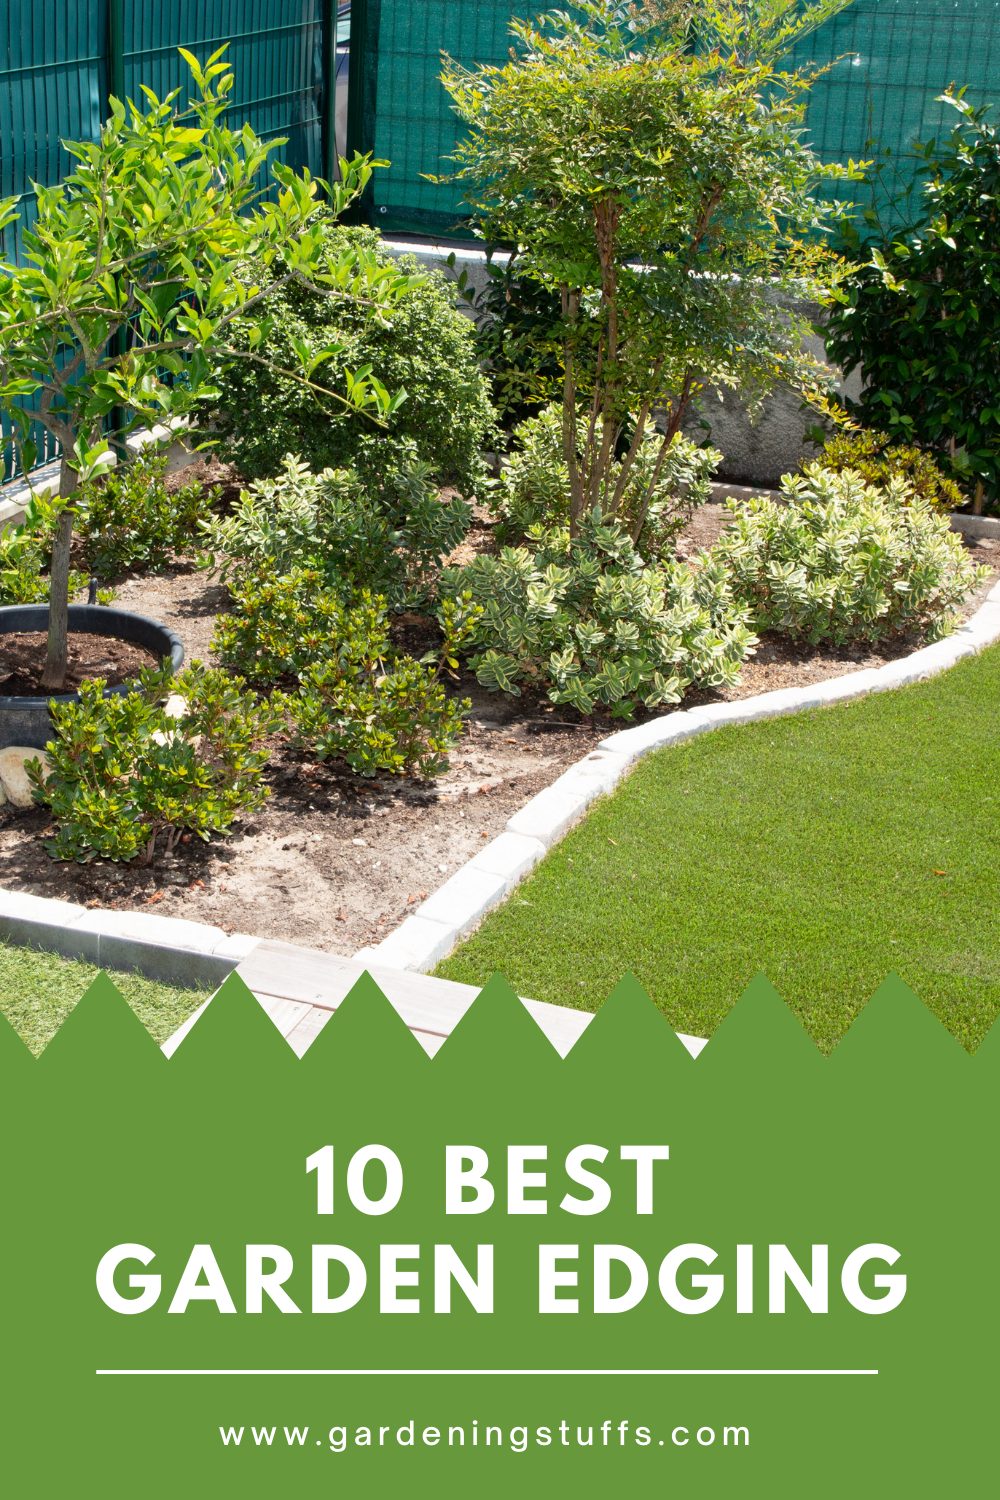 Edging can make your lawn and garden look well-maintained and professionally done. But with a hundred options in the market, it’s easy to get lost. On the edge of planning. Check out this article, we’ve listed down the best lawn edging products and we also review the functions of each edging type, so you’d know which one can be suitable for your needs. Let’s check them out.